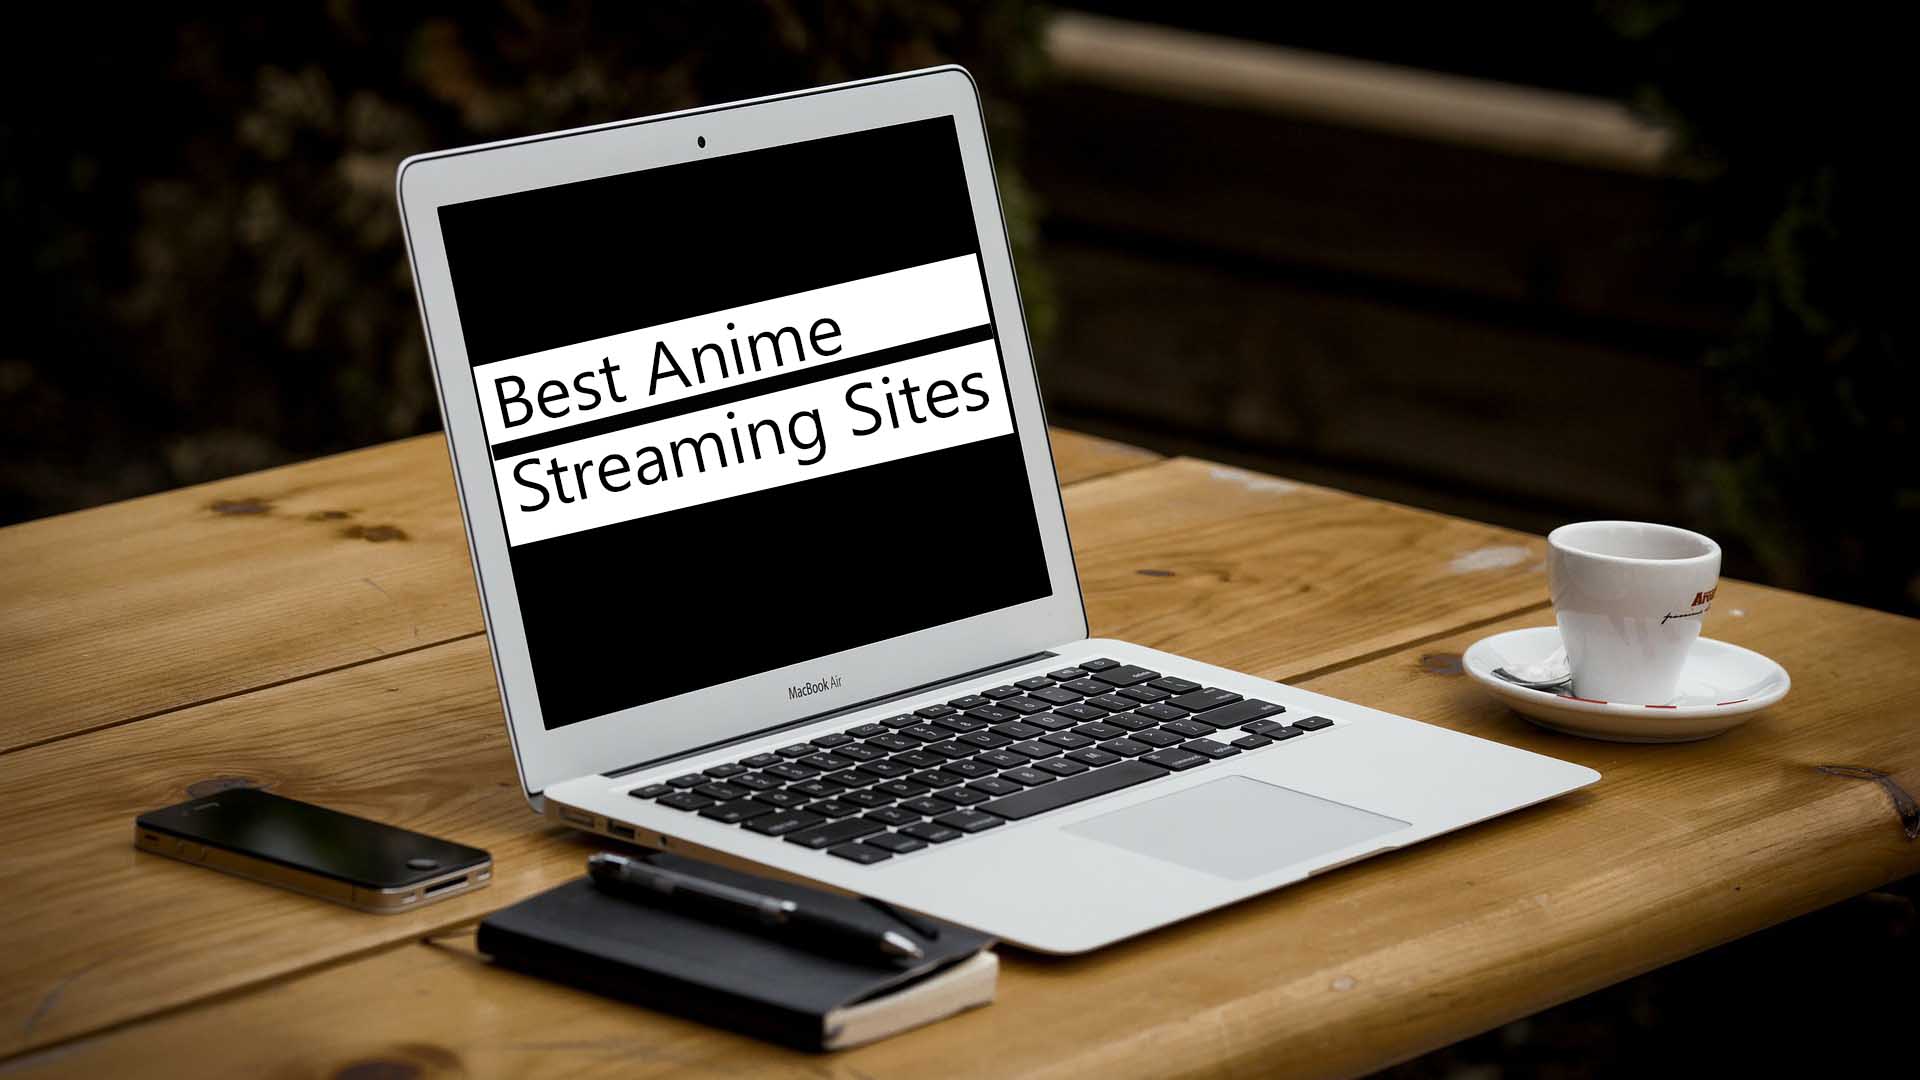 Best Anime Streaming Sites to Watch Anime Online Free